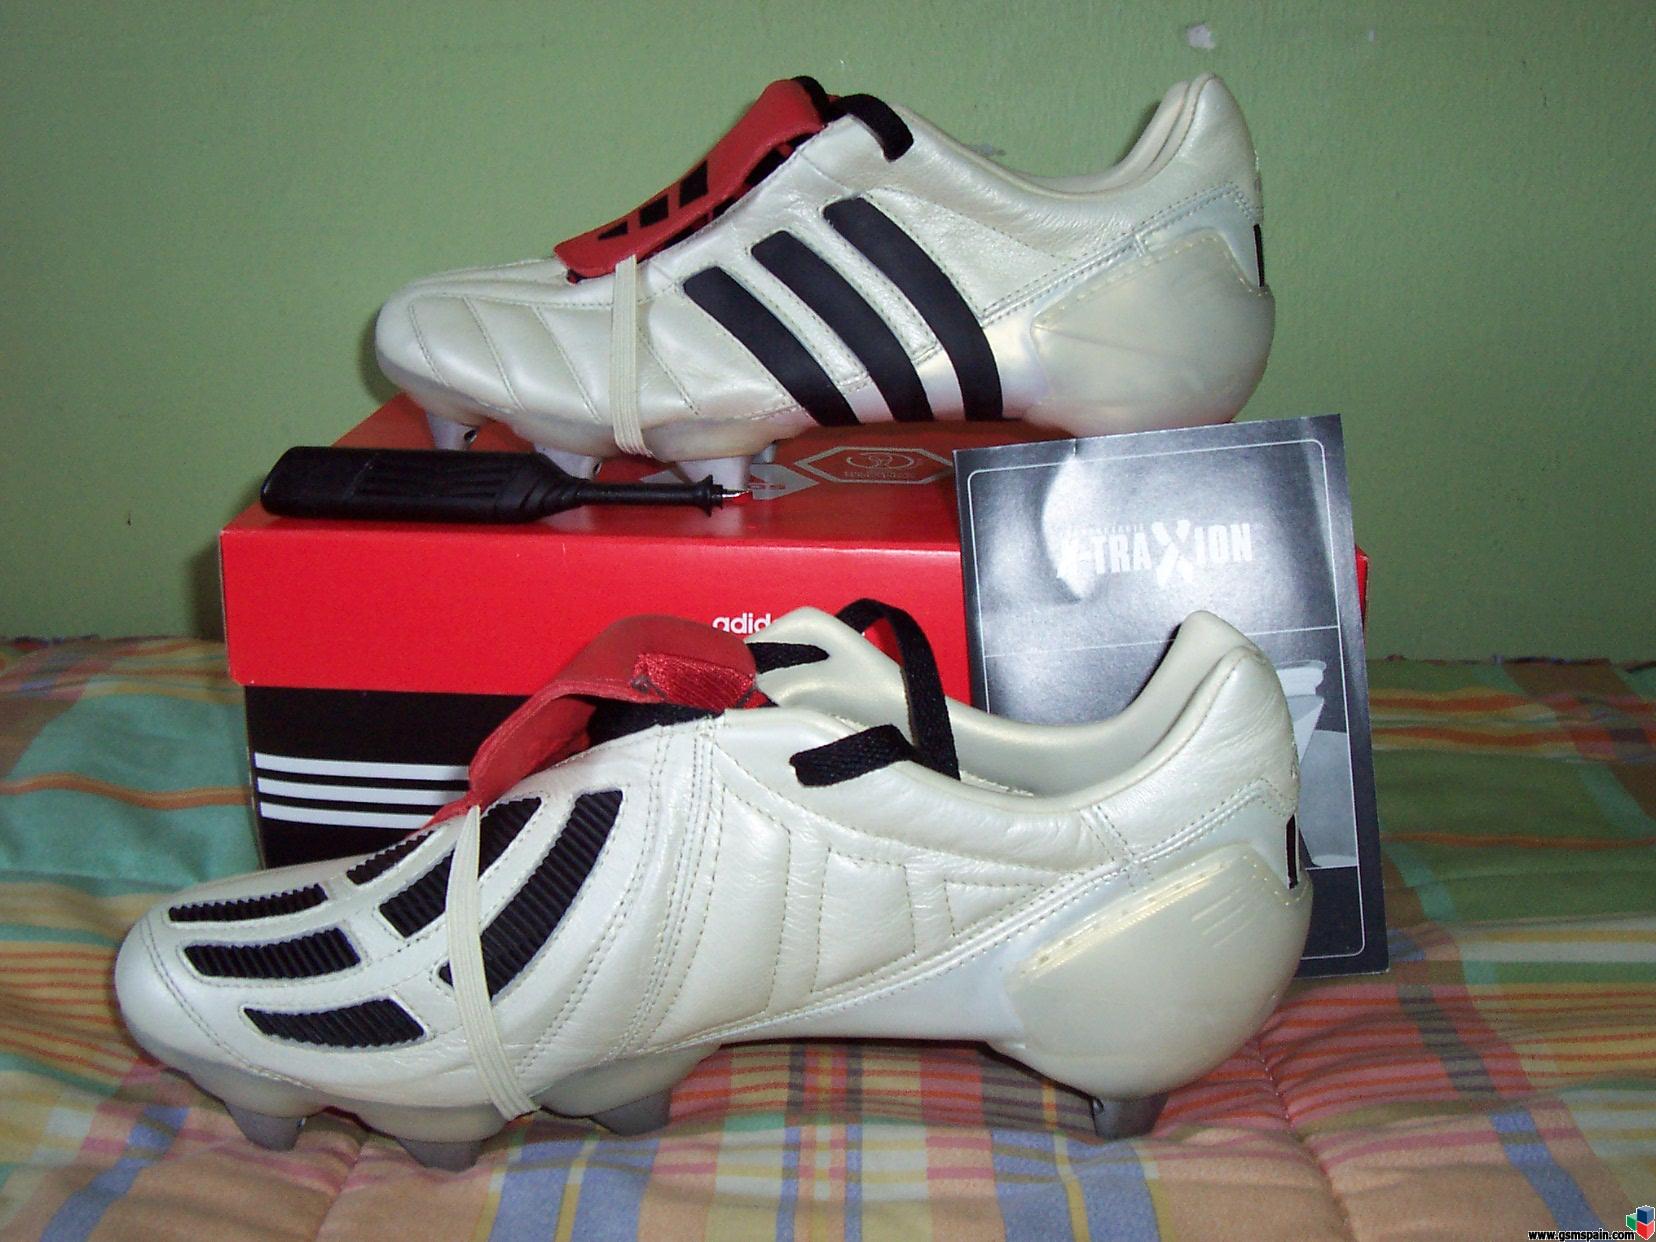 old style predator football boots